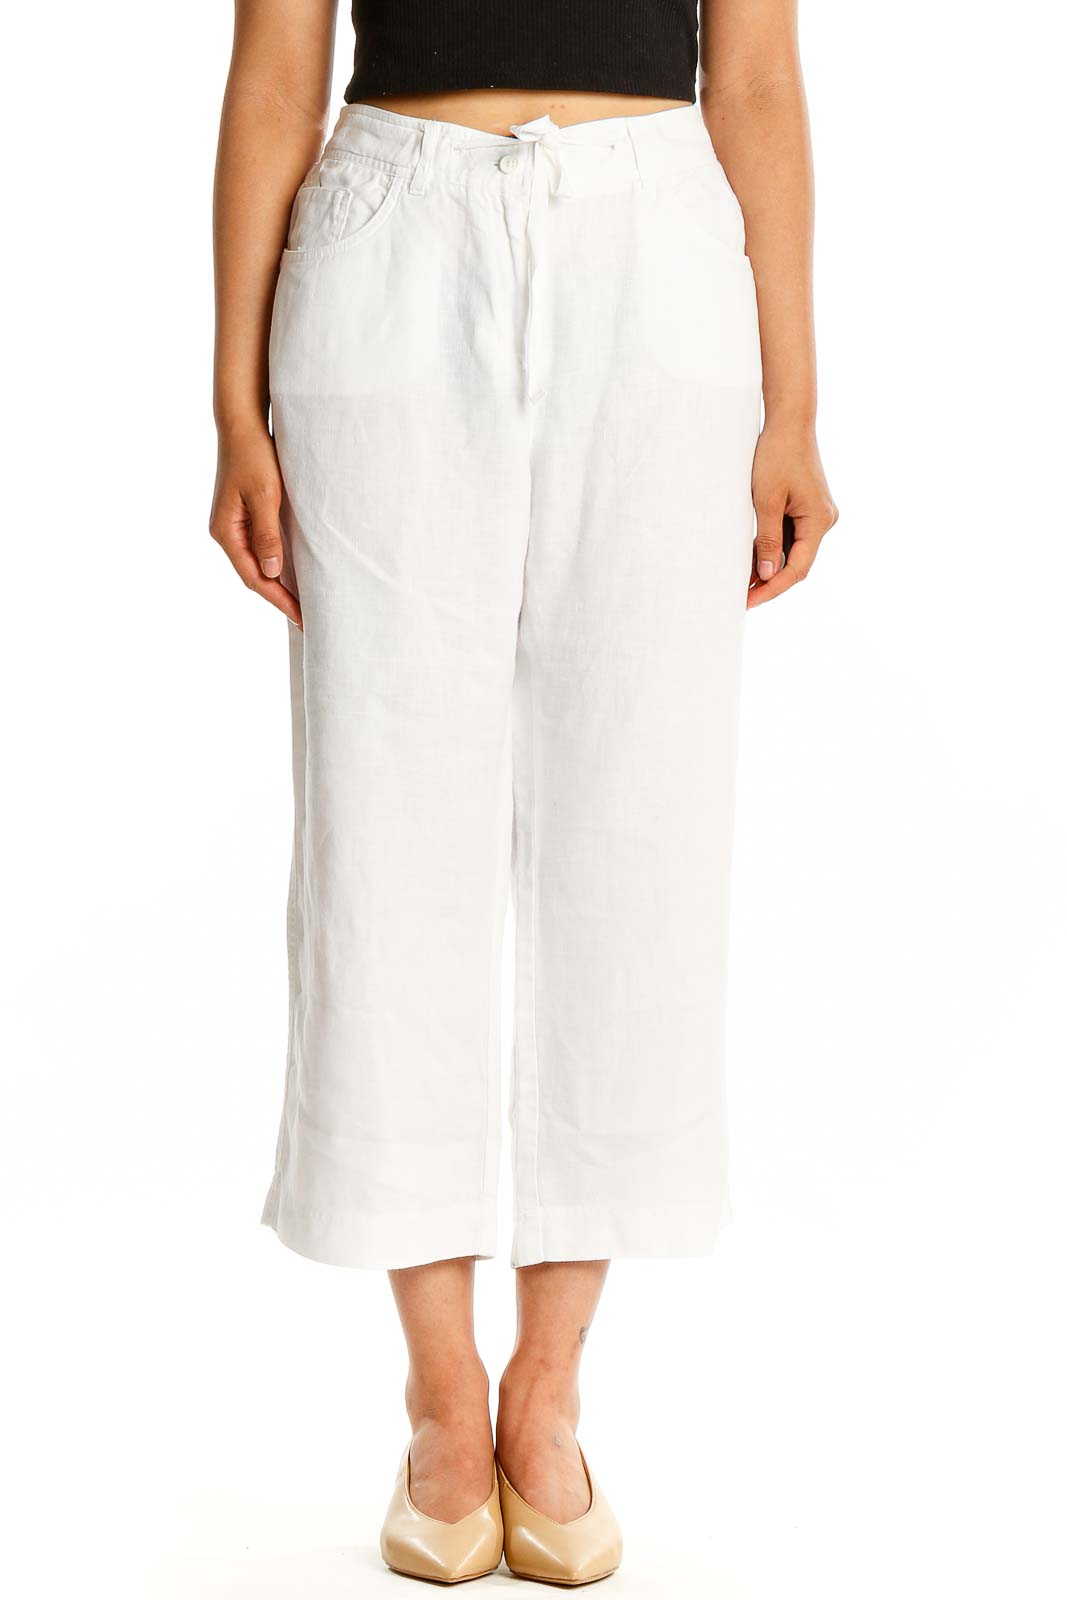 White Drawstring Casual All Day Pants Front